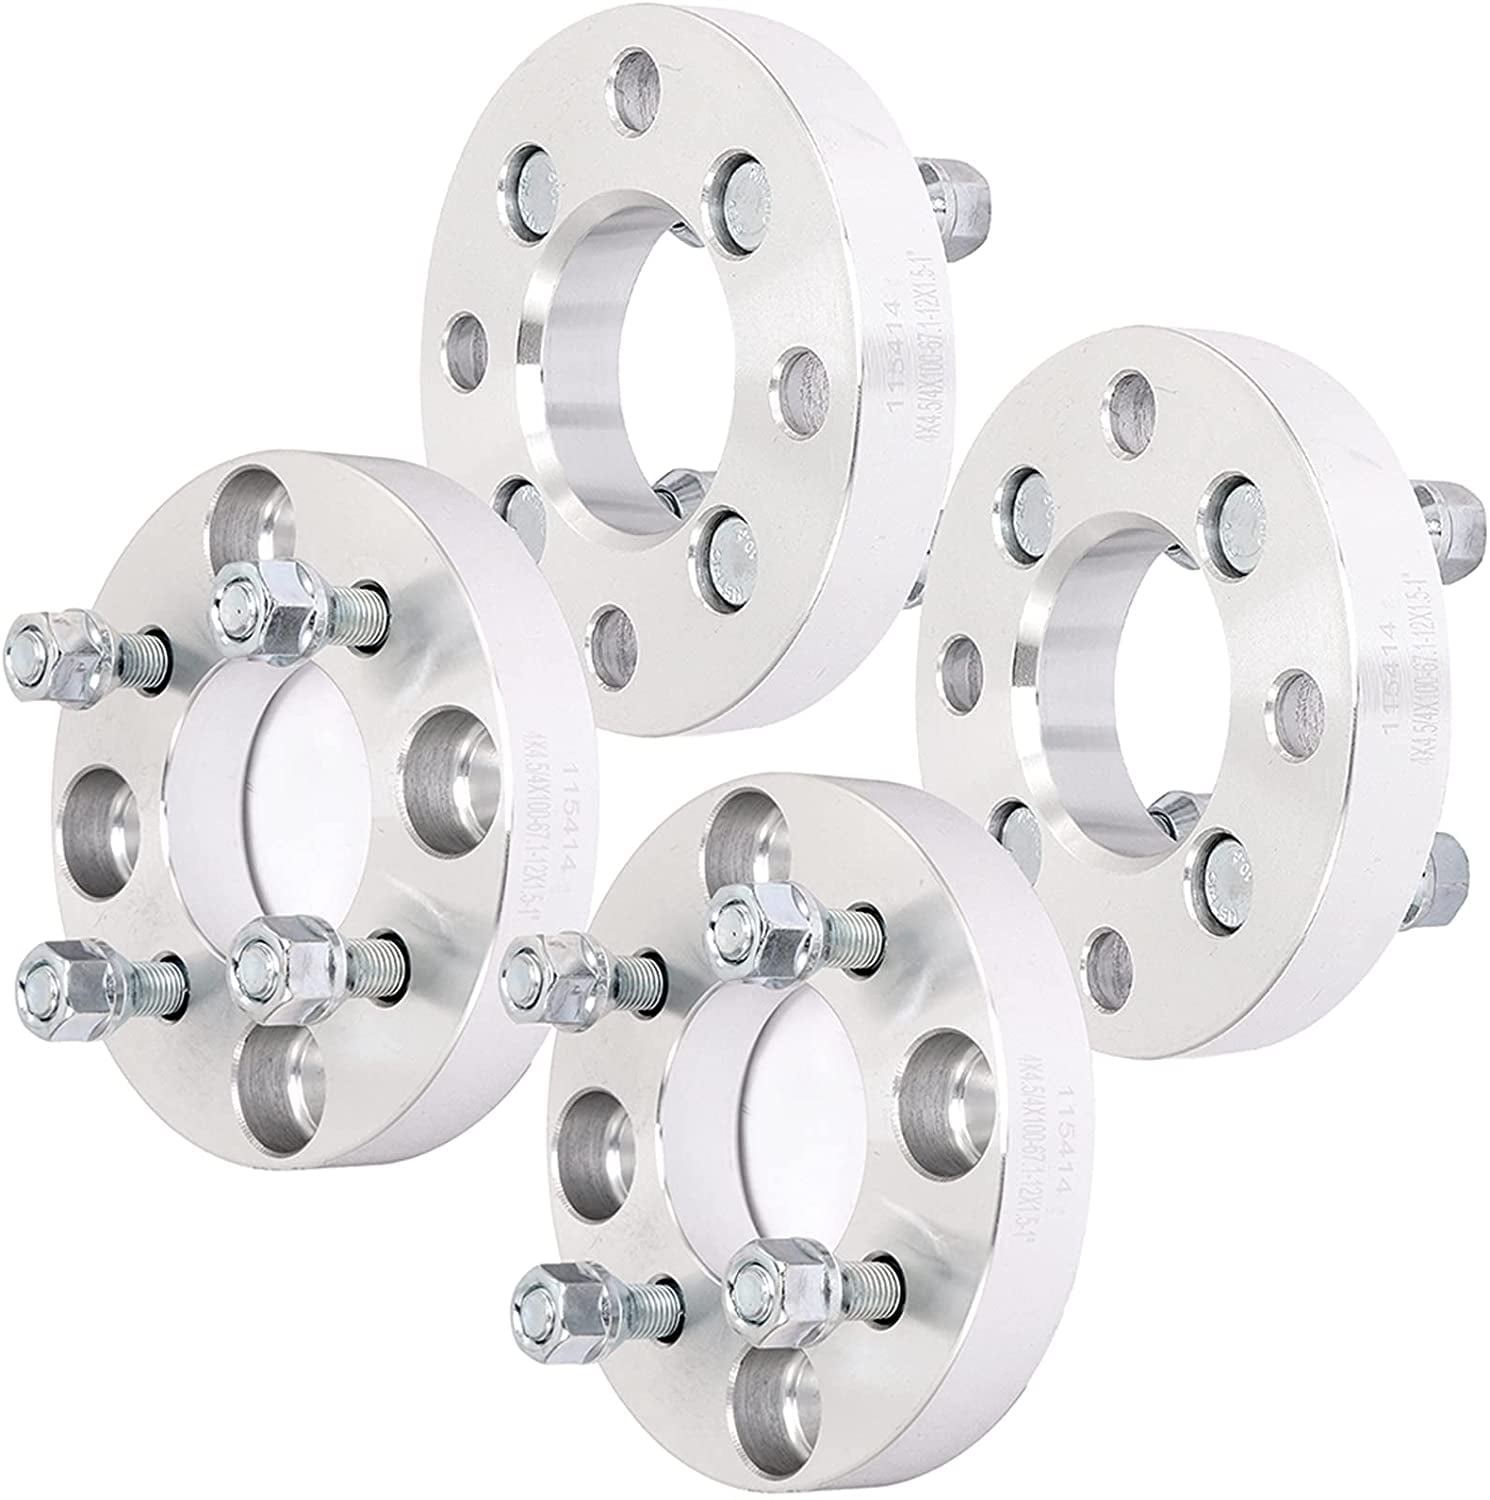 ECCPP 5 lug Hubcentric Wheel Spacers 4x114.3mm 25mm 4x114.3 to 4x114.5 4x4.5 to 5x4.5 66.1mm CB 12x1.25 Studs Fits for Nissan Primera Maxima Cube Axxess Altima 300zx 